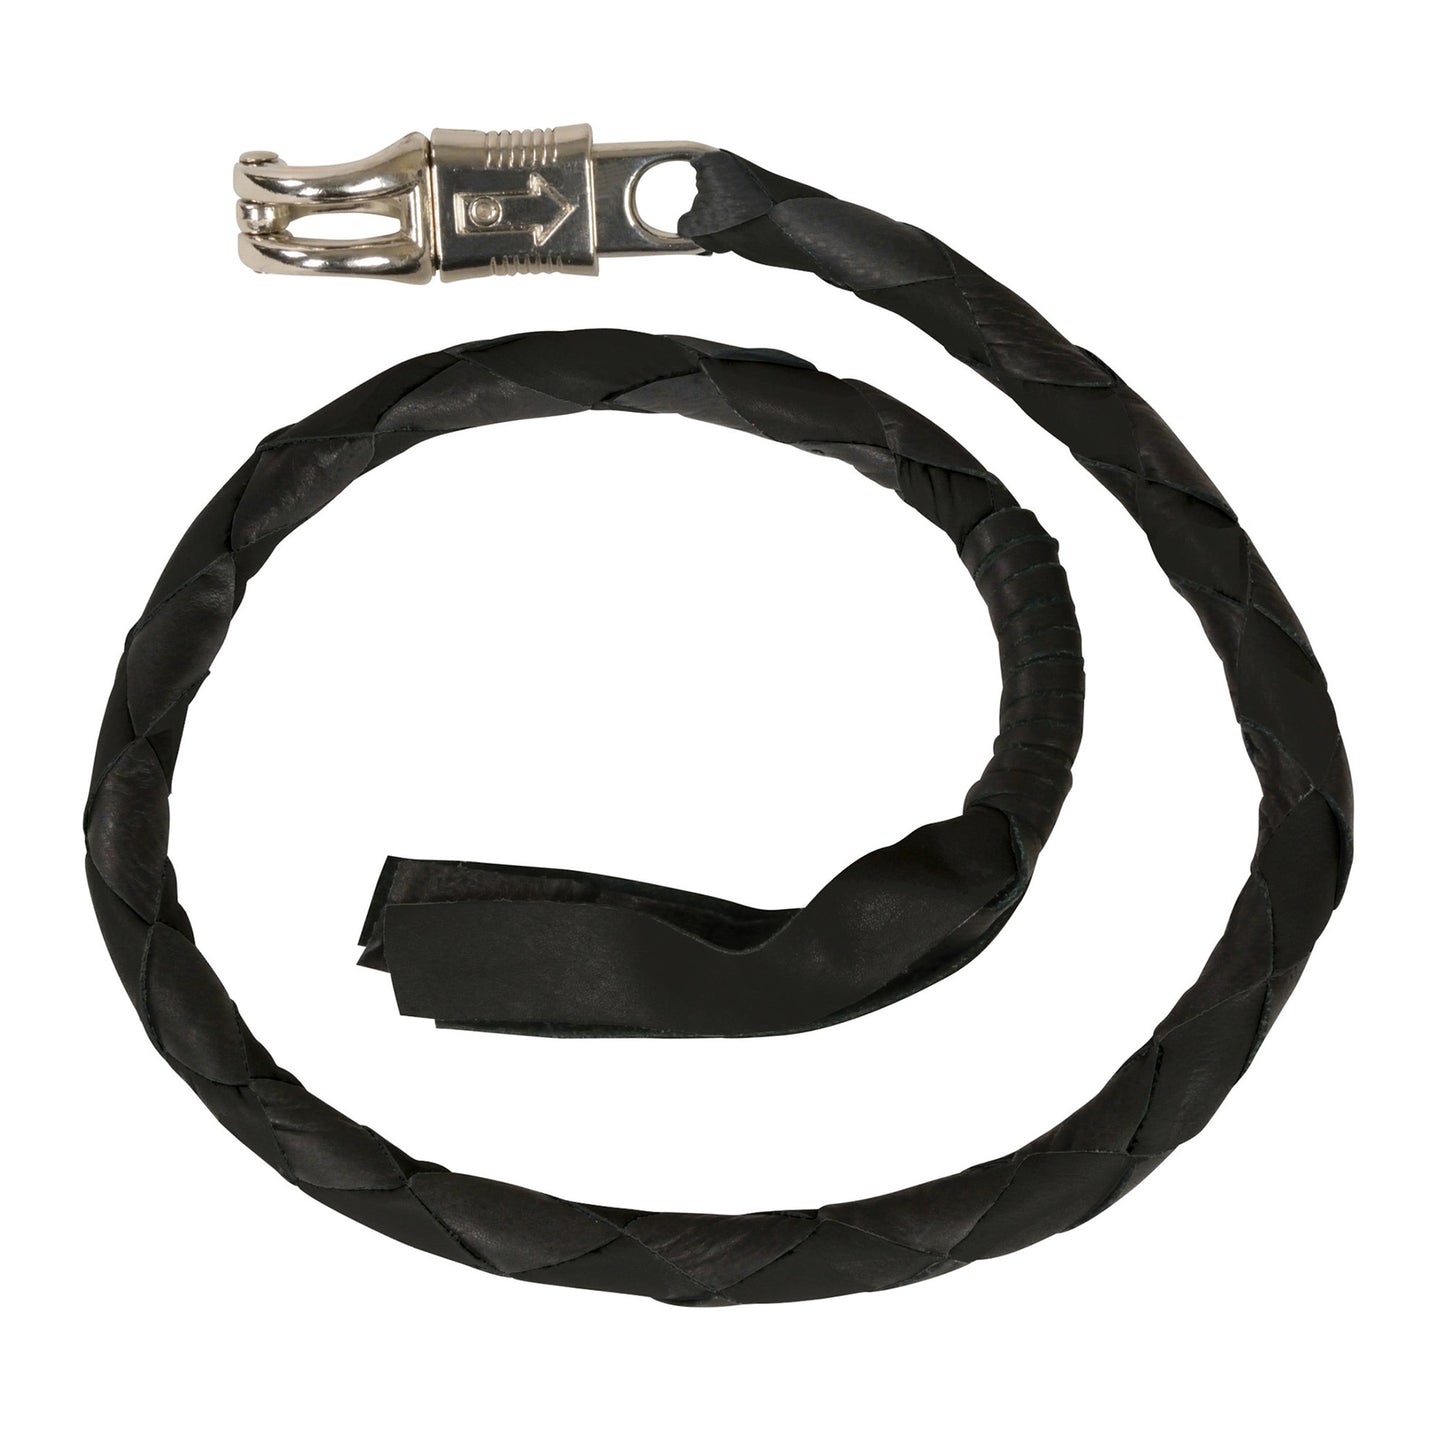 Leather “Get Back” Whip for Motorcycles